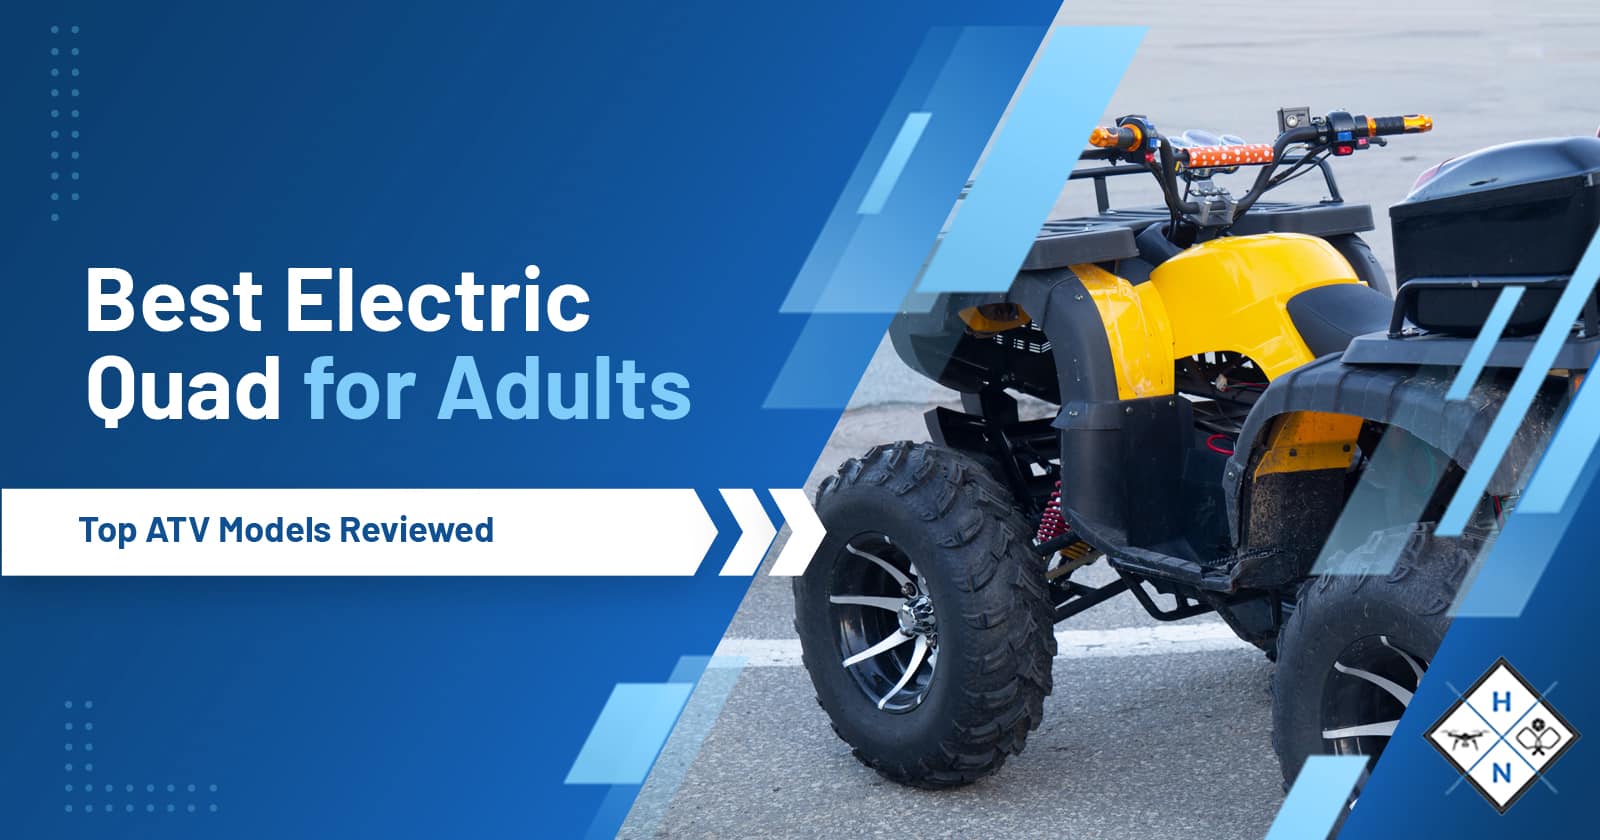 Best Electric Quad for Adults Top ATV Models Reviewed